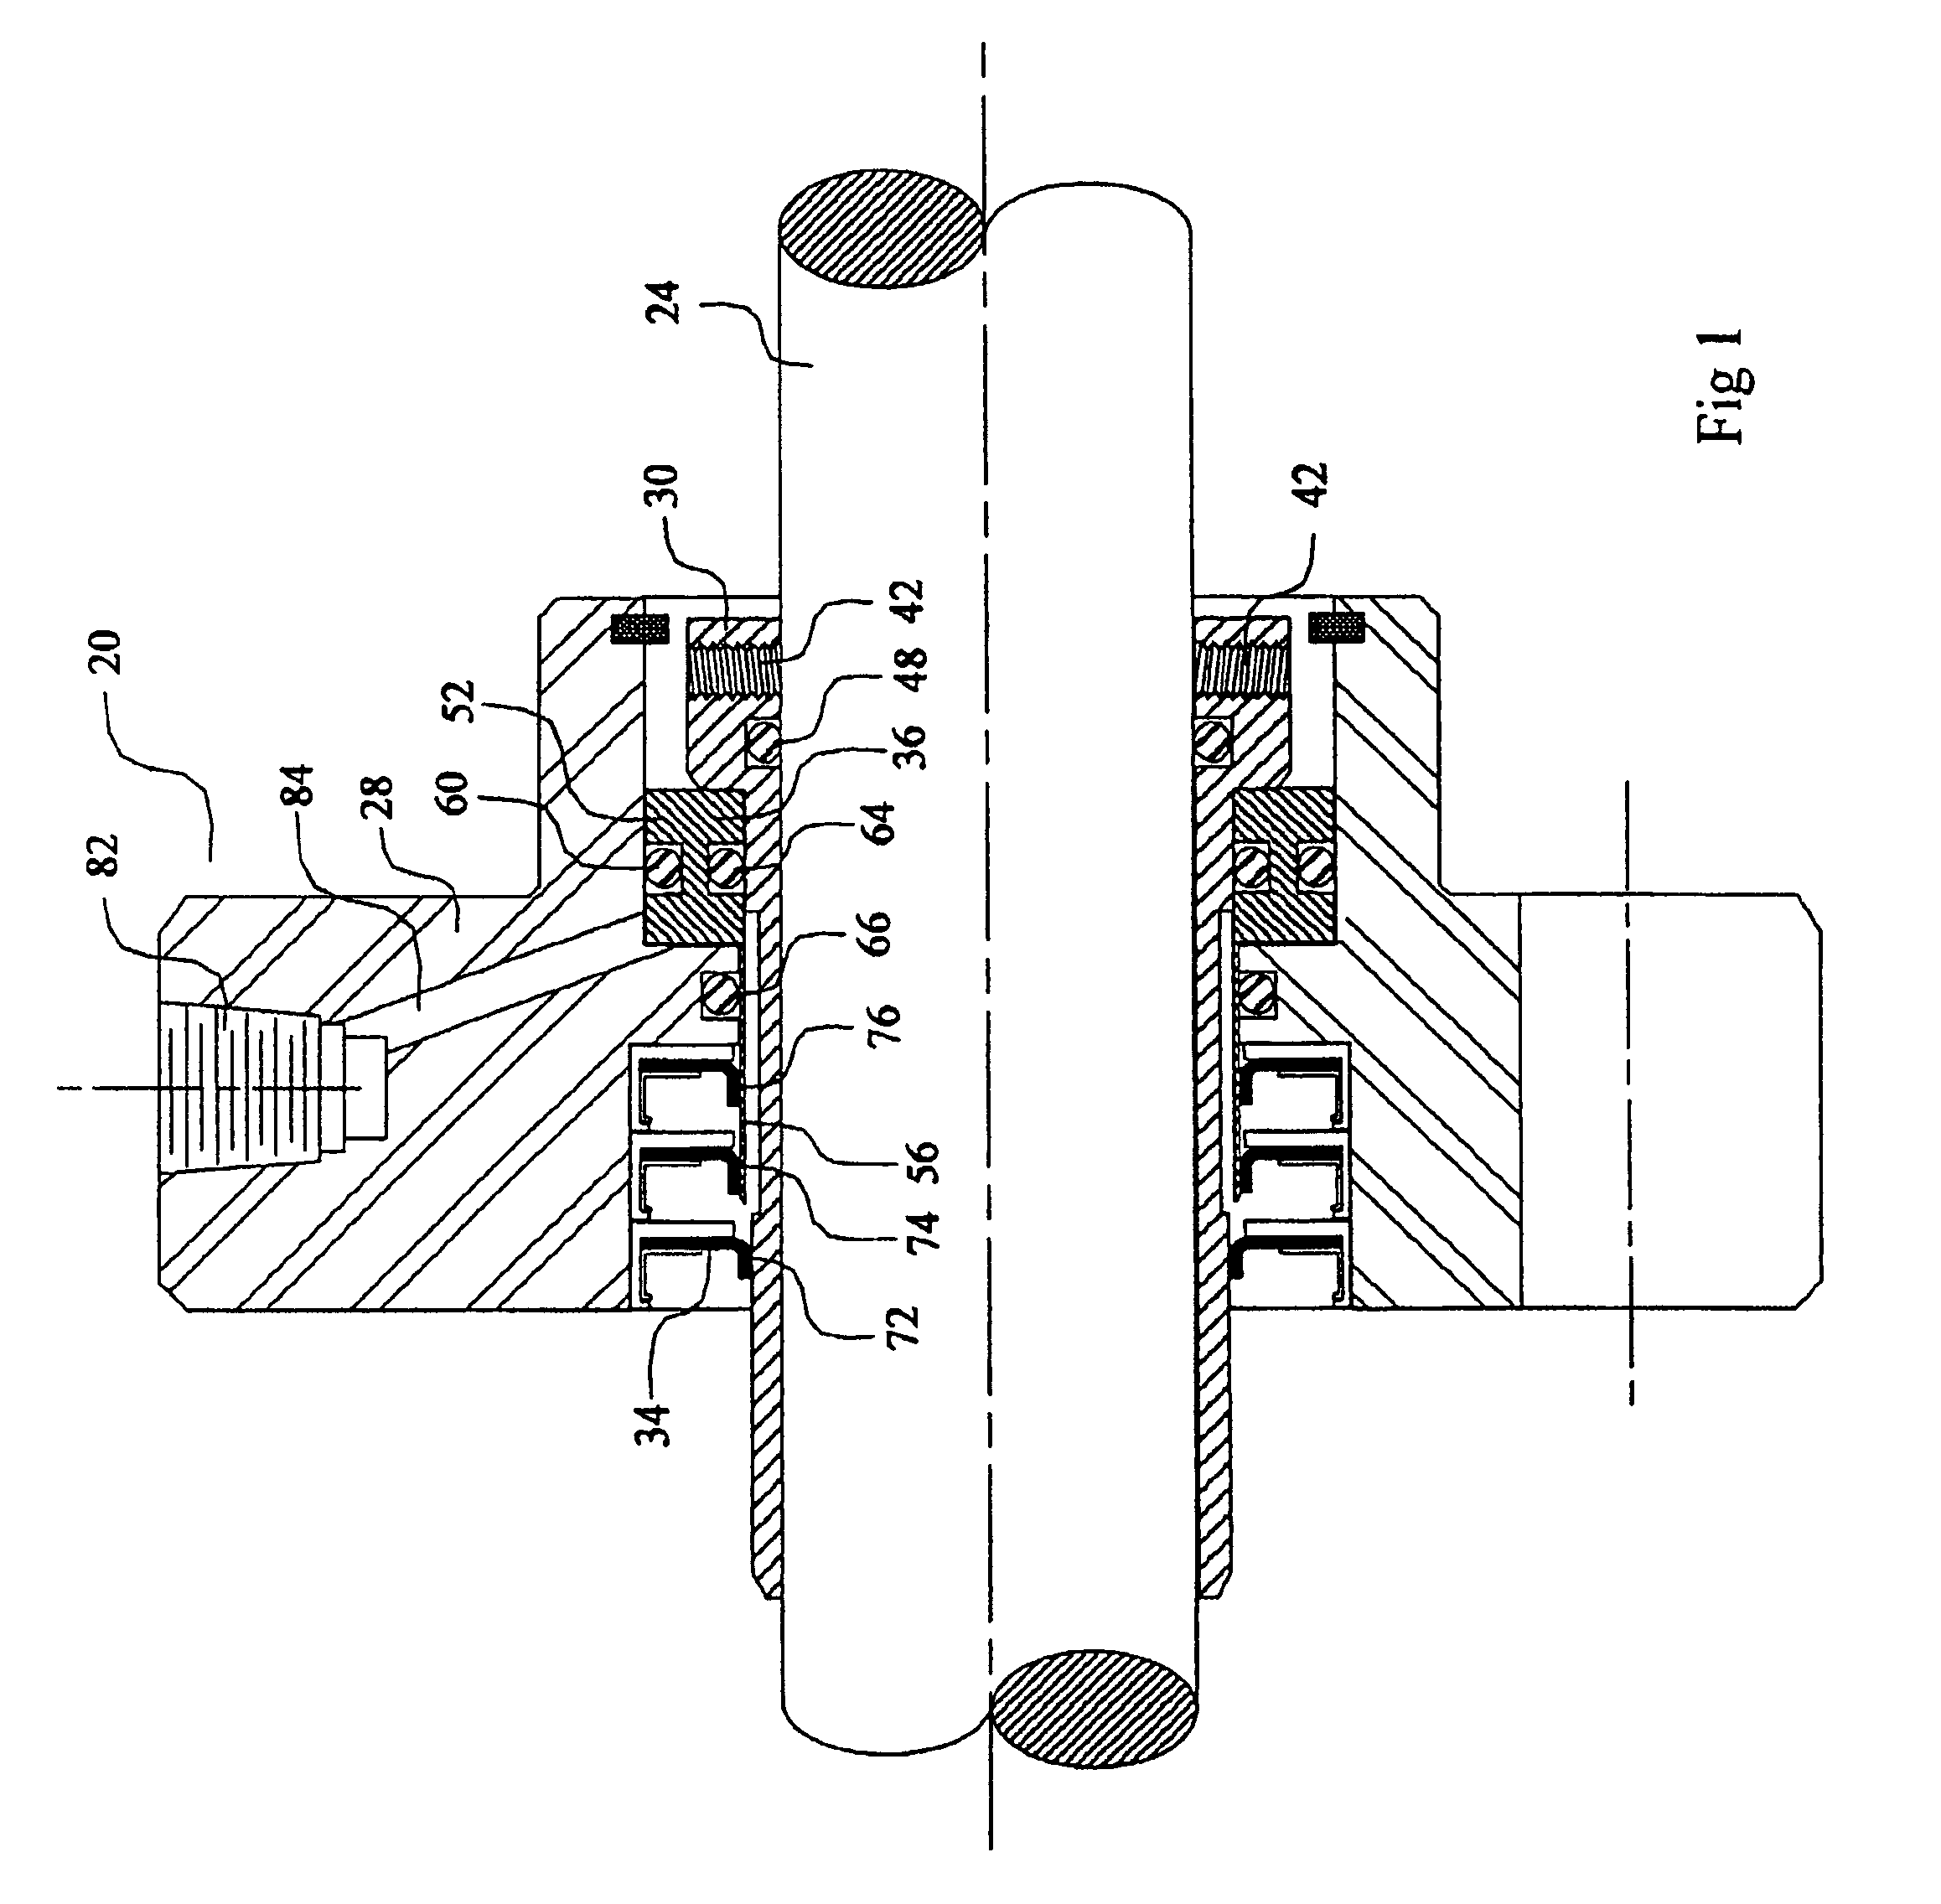 Sealing apparatus having sequentially engageable seals